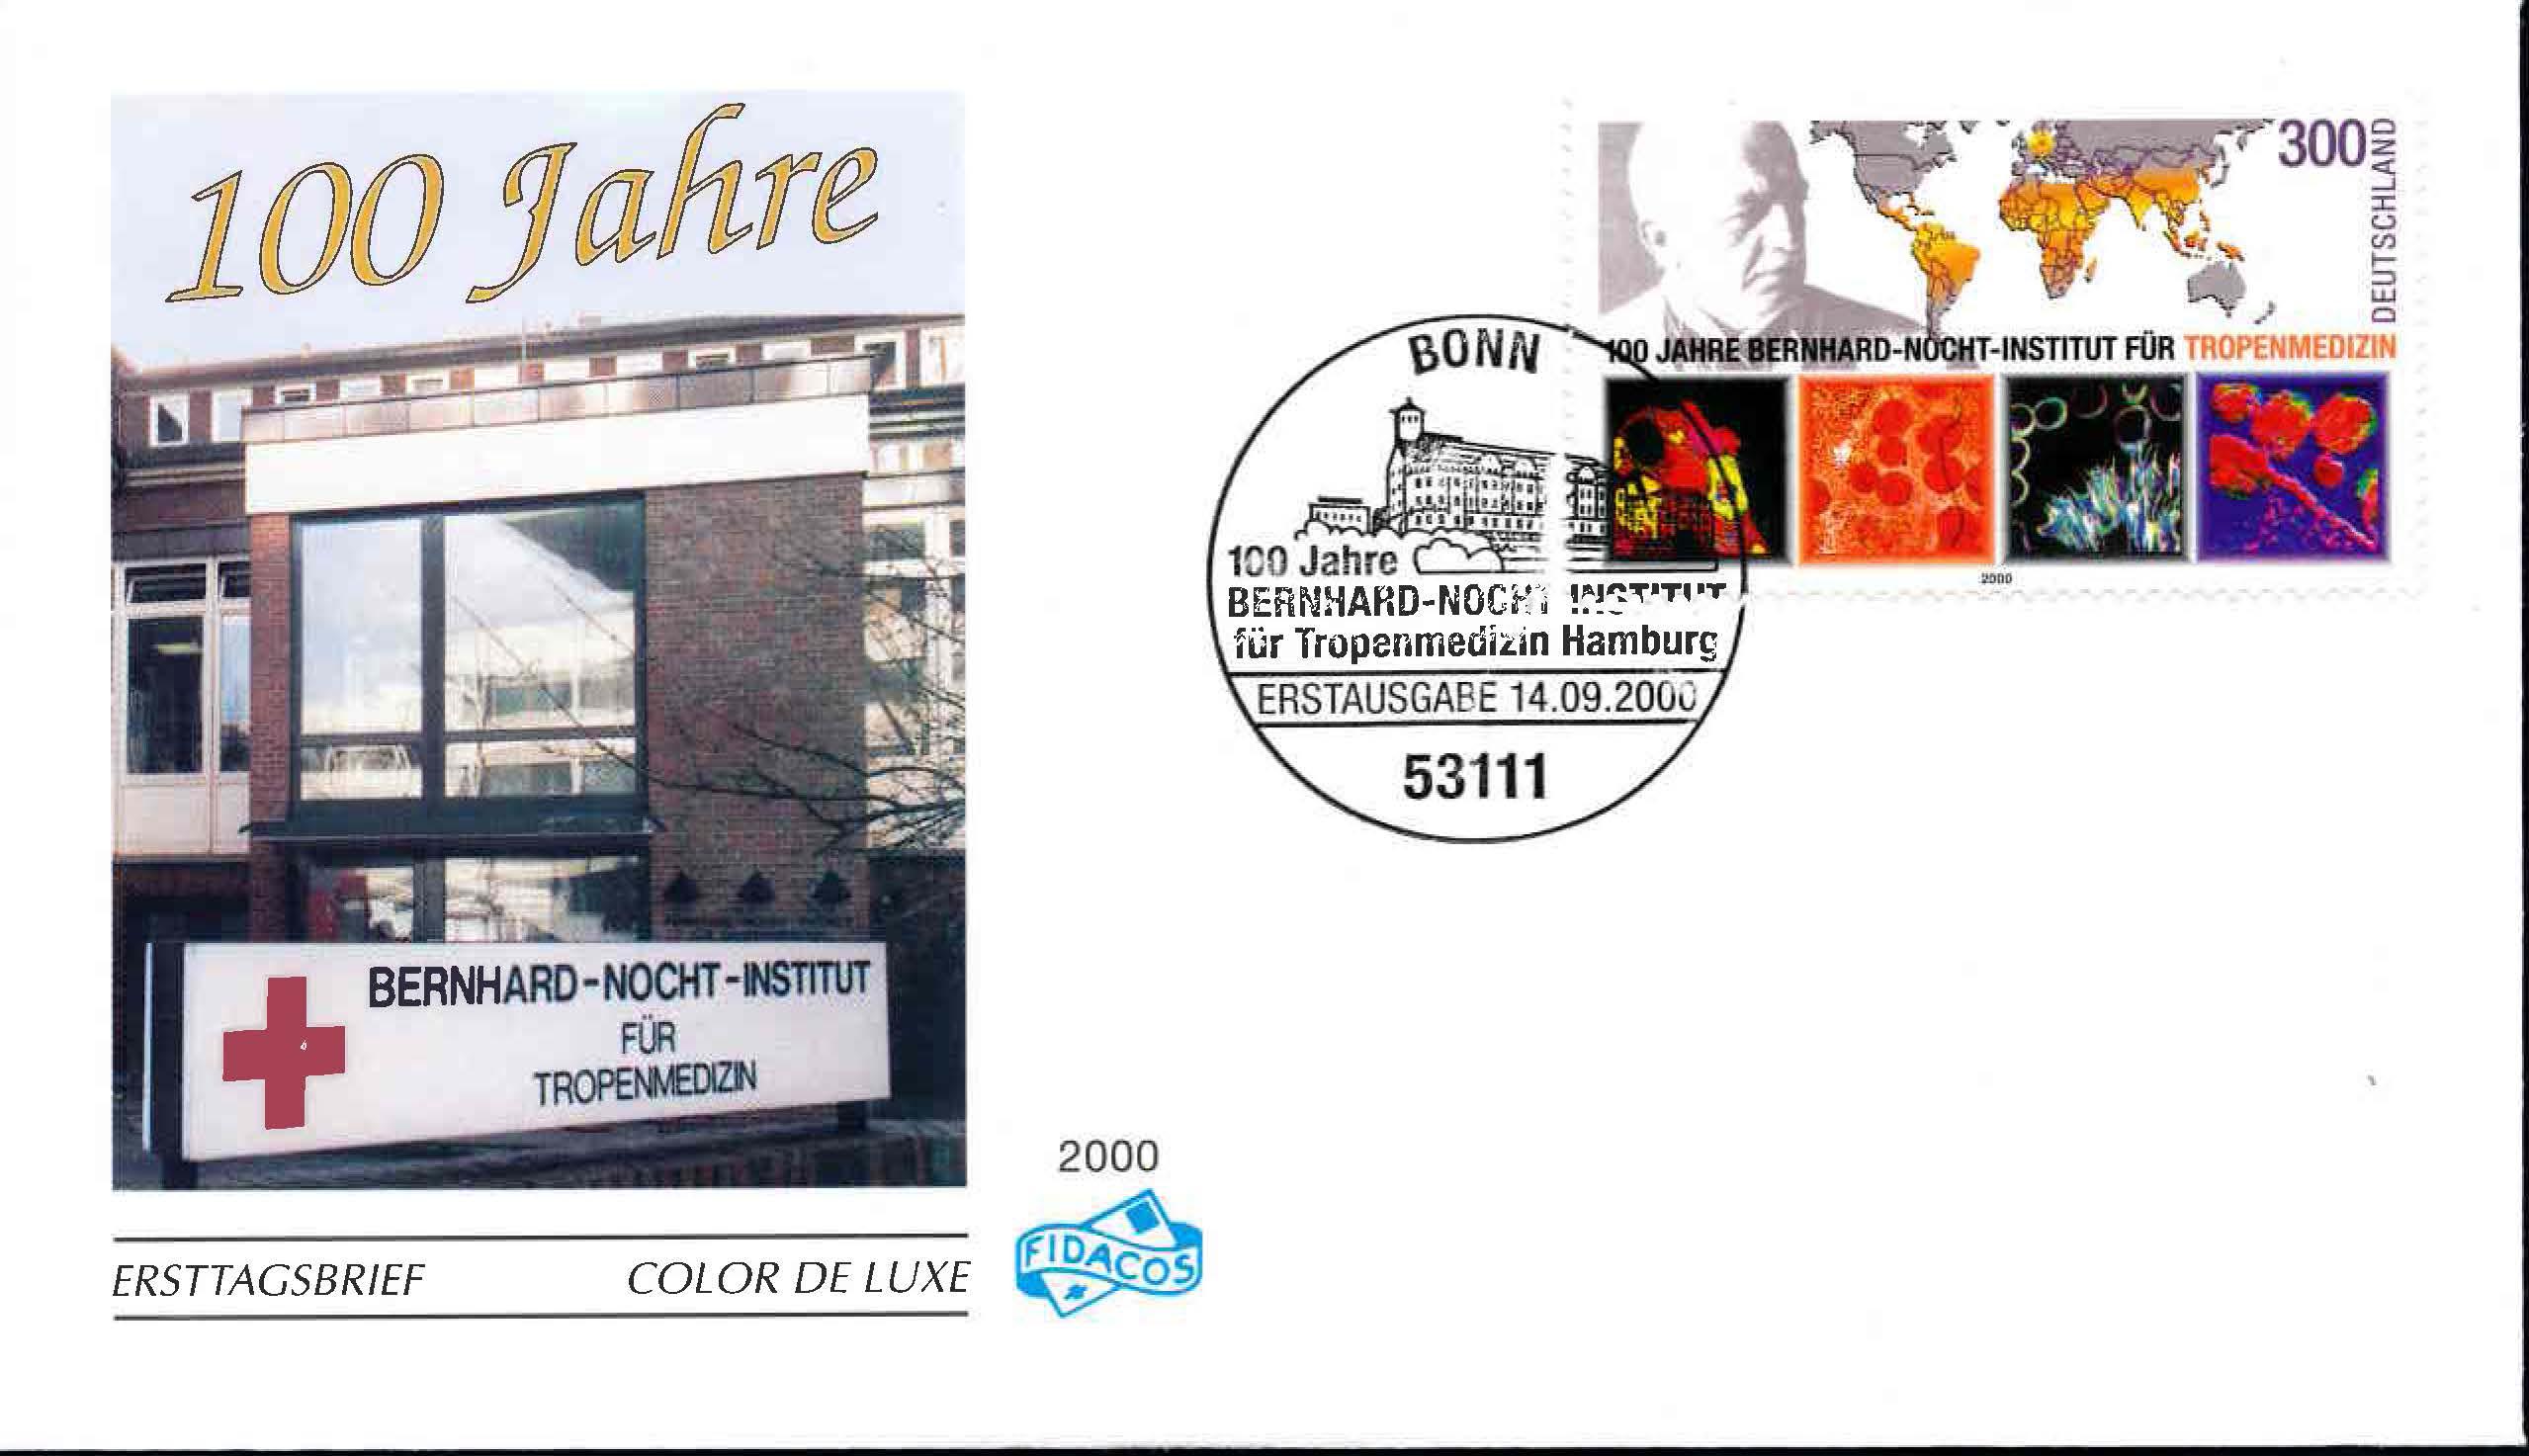 Germany Scott 2101 - First Day Cover, Cachet 1 - Bonn First Day Cancellation